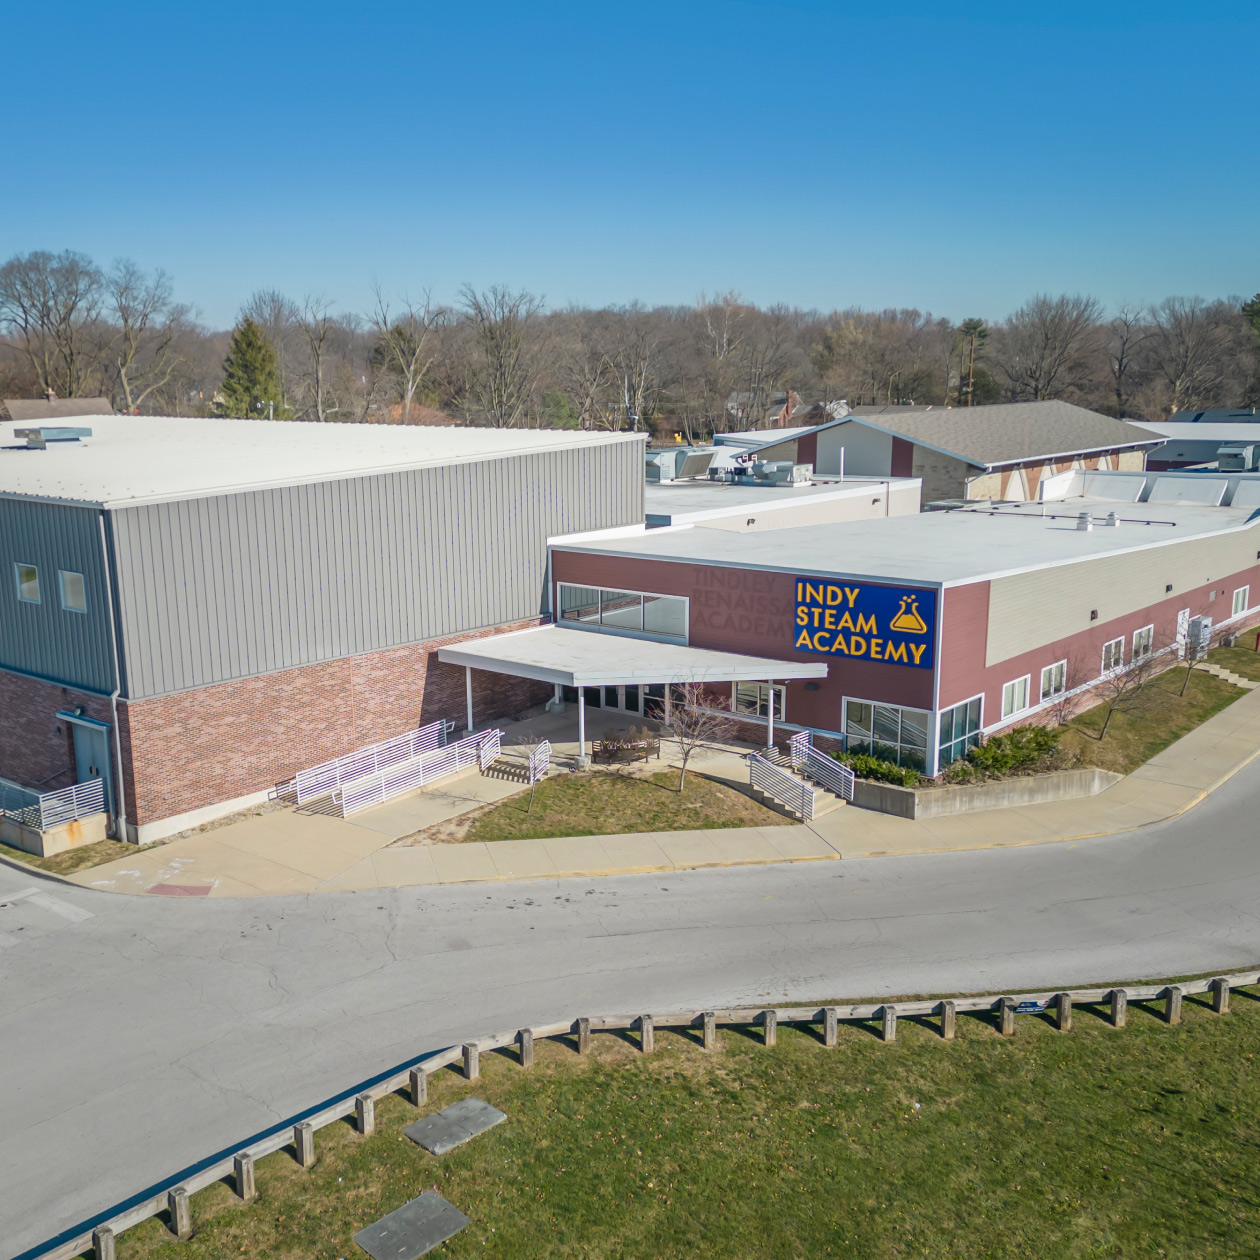 Exterior aerial view of Indy STEAM Academy building